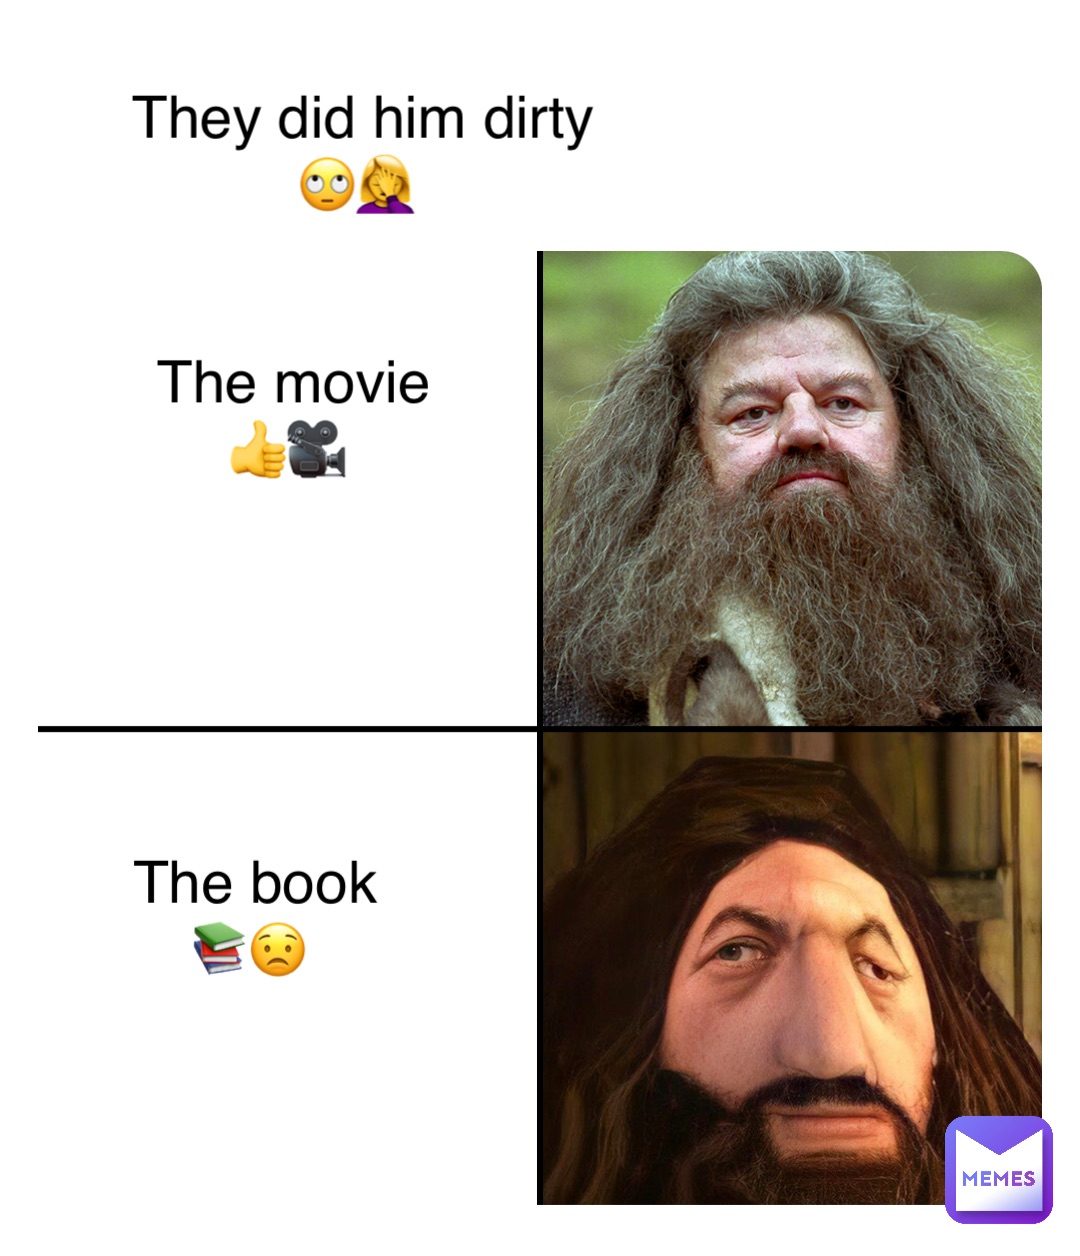 Double tap to edit The movie 
👍🎥 The book 
📚😟 They did him dirty 
🙄🤦‍♀️